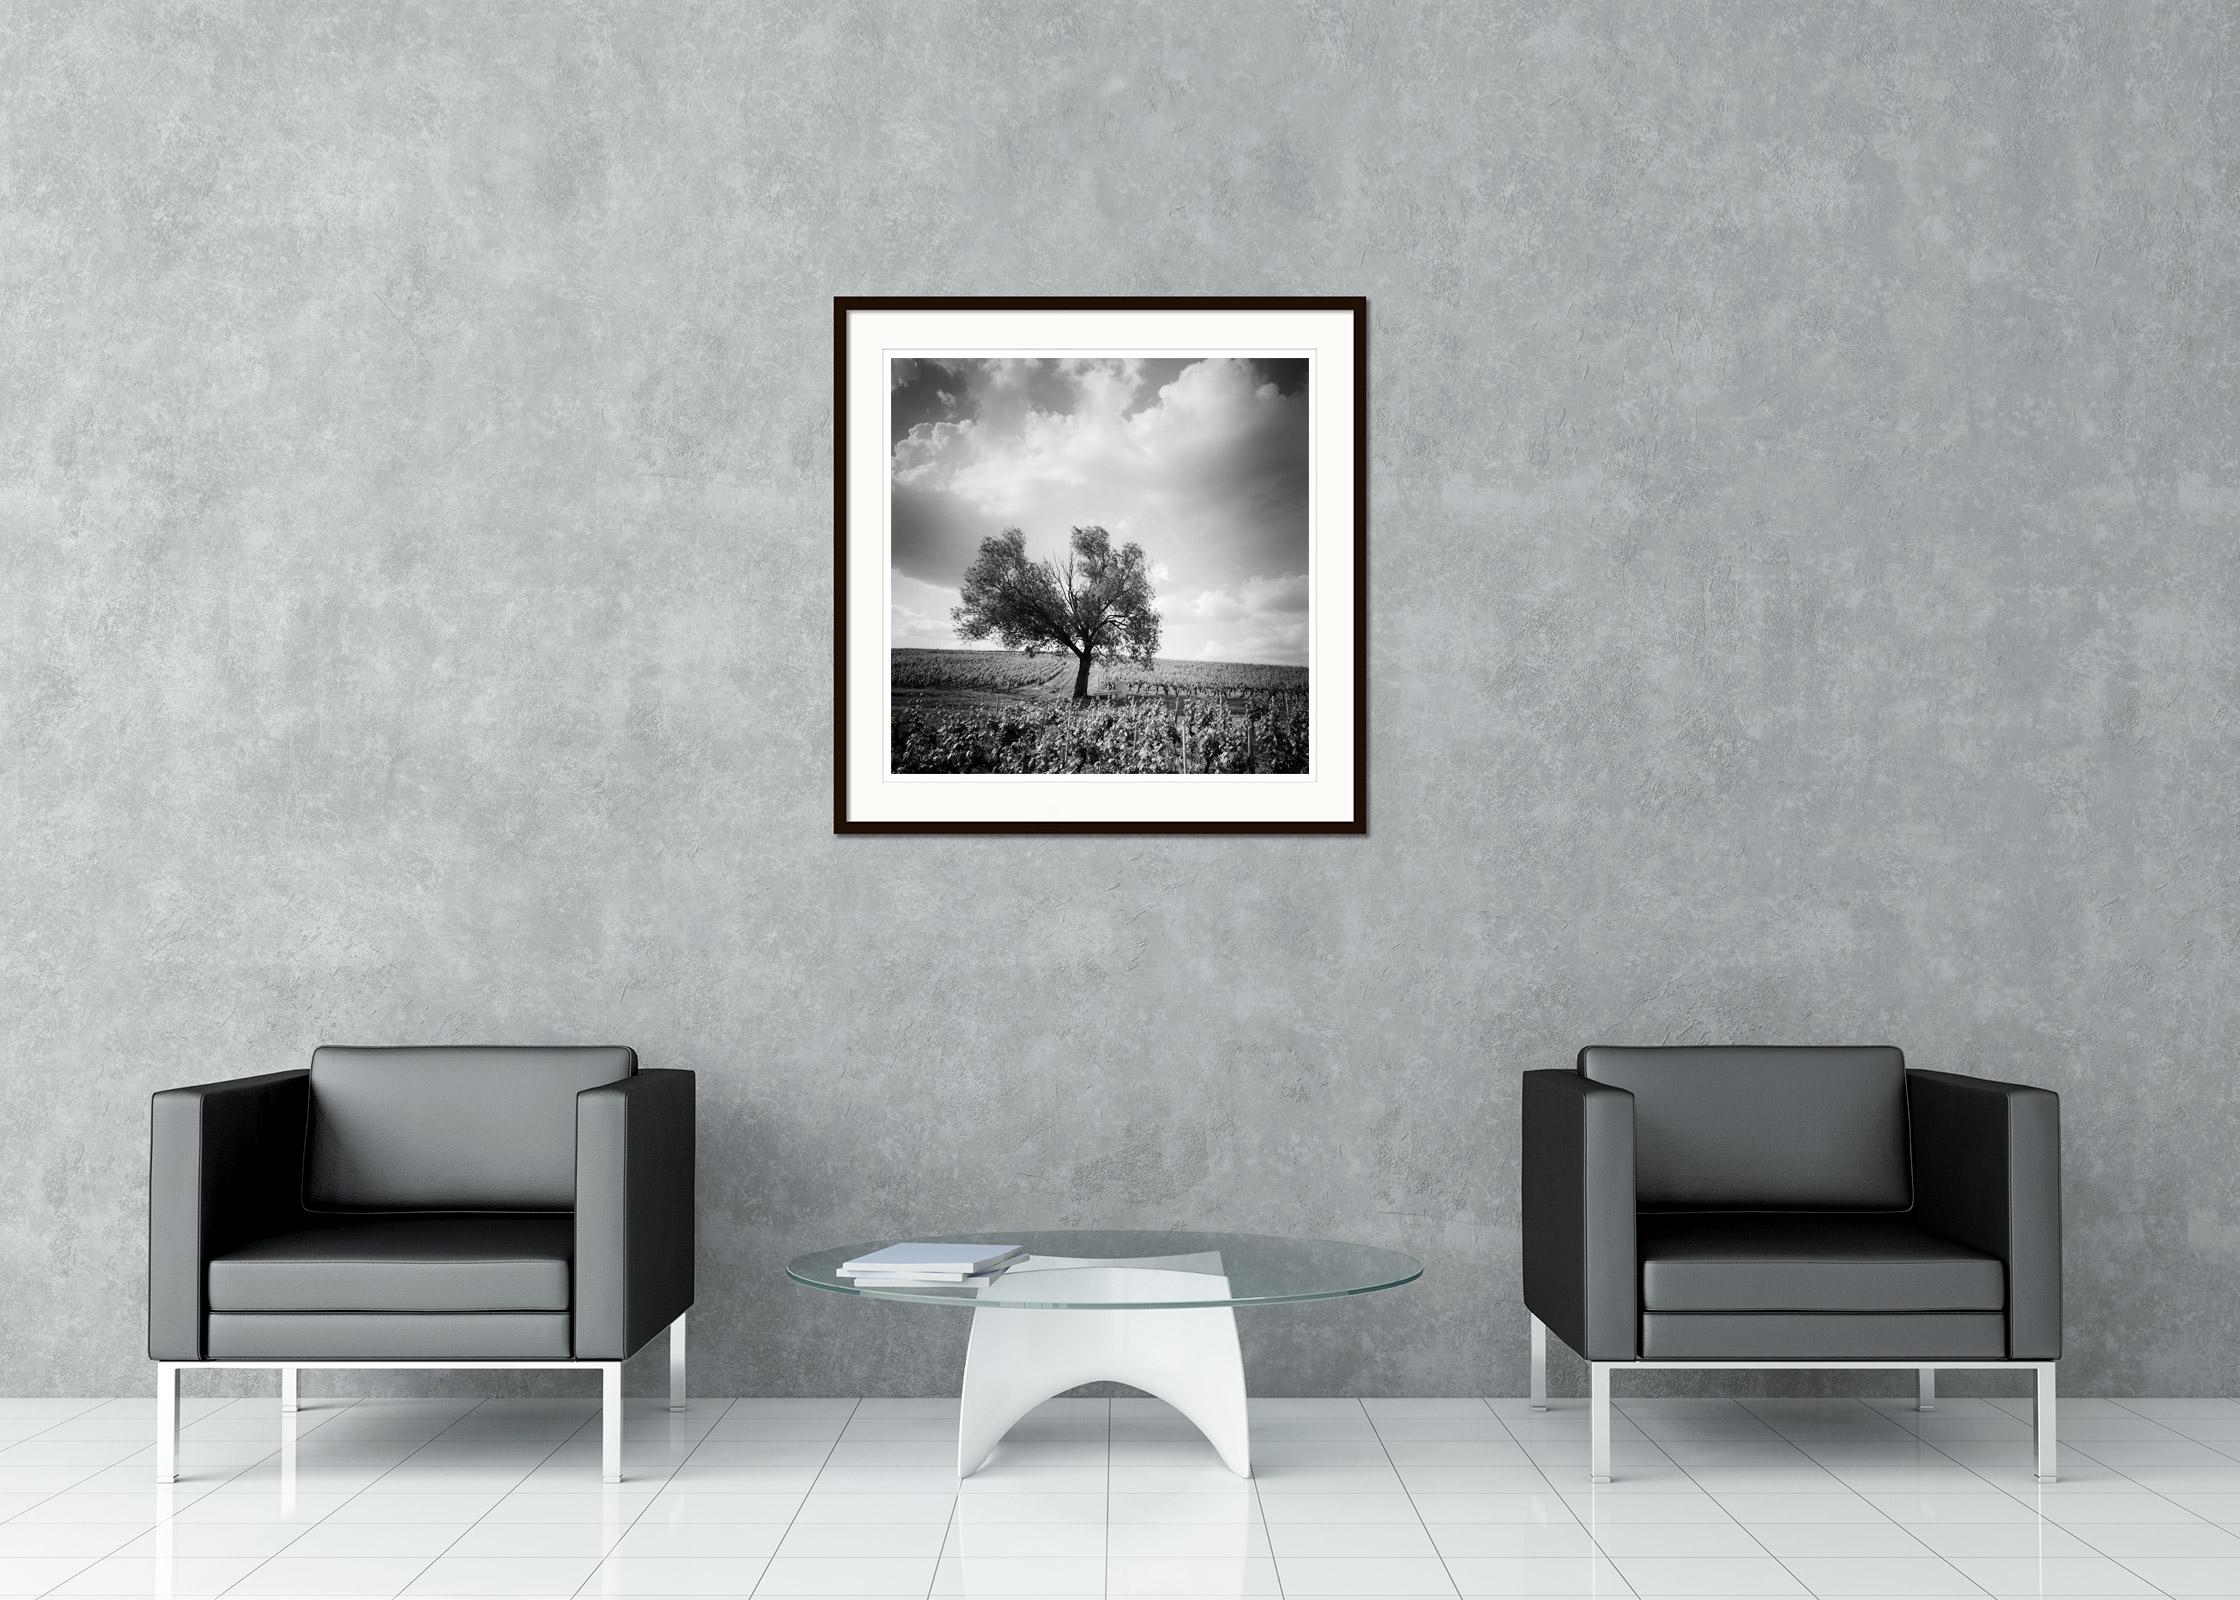 Black and White Fine Art Landscape Photography - Tree in the middle of beautiful vineyard with big clouds in Bordeaux, France. Archival pigment ink print, edition of 5. Signed, titled, dated and numbered by artist. Certificate of authenticity